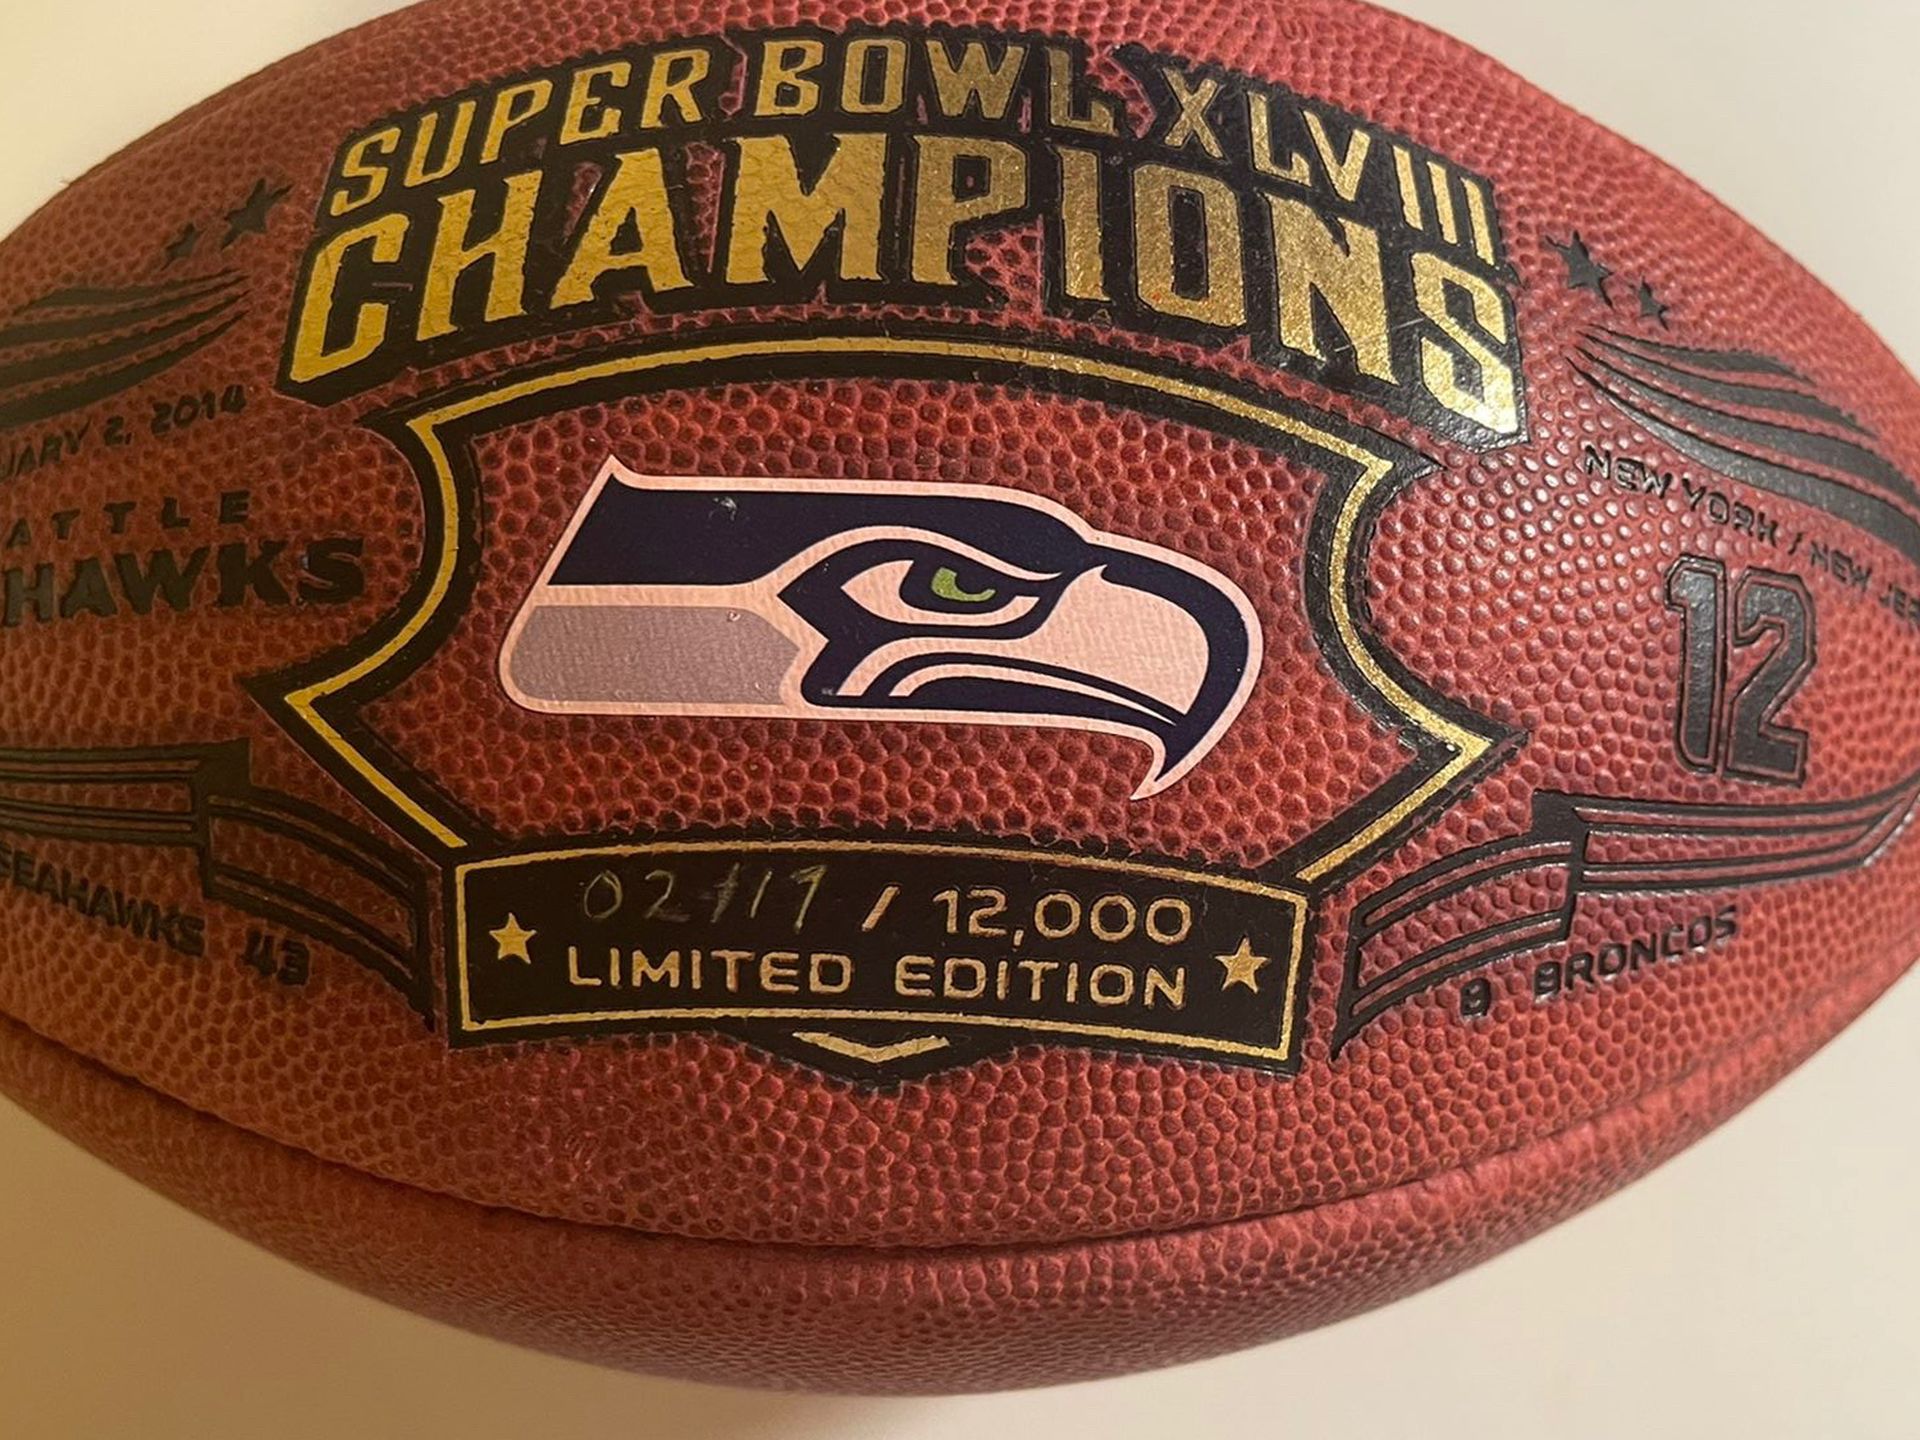 Seahawks Super Bowl Limited Edition Commemorative Football From Wilson - “The Duke”